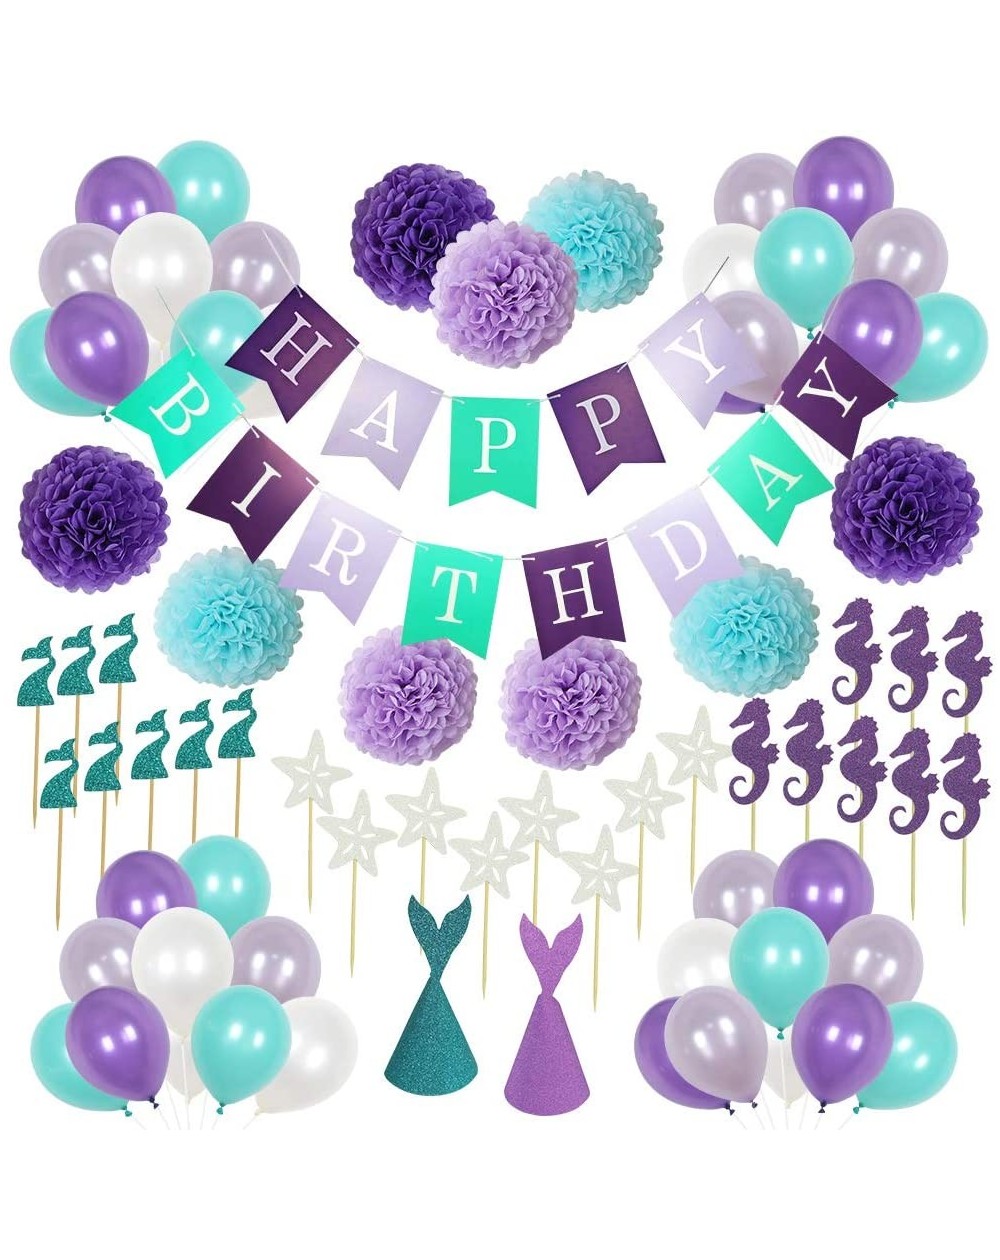 Party Packs Mermaid Theme Birthday Decorations Party Supplies-1 Happy Birthday Banner-2 Mermaid Party Hats-9 Pom Poms Flowers...